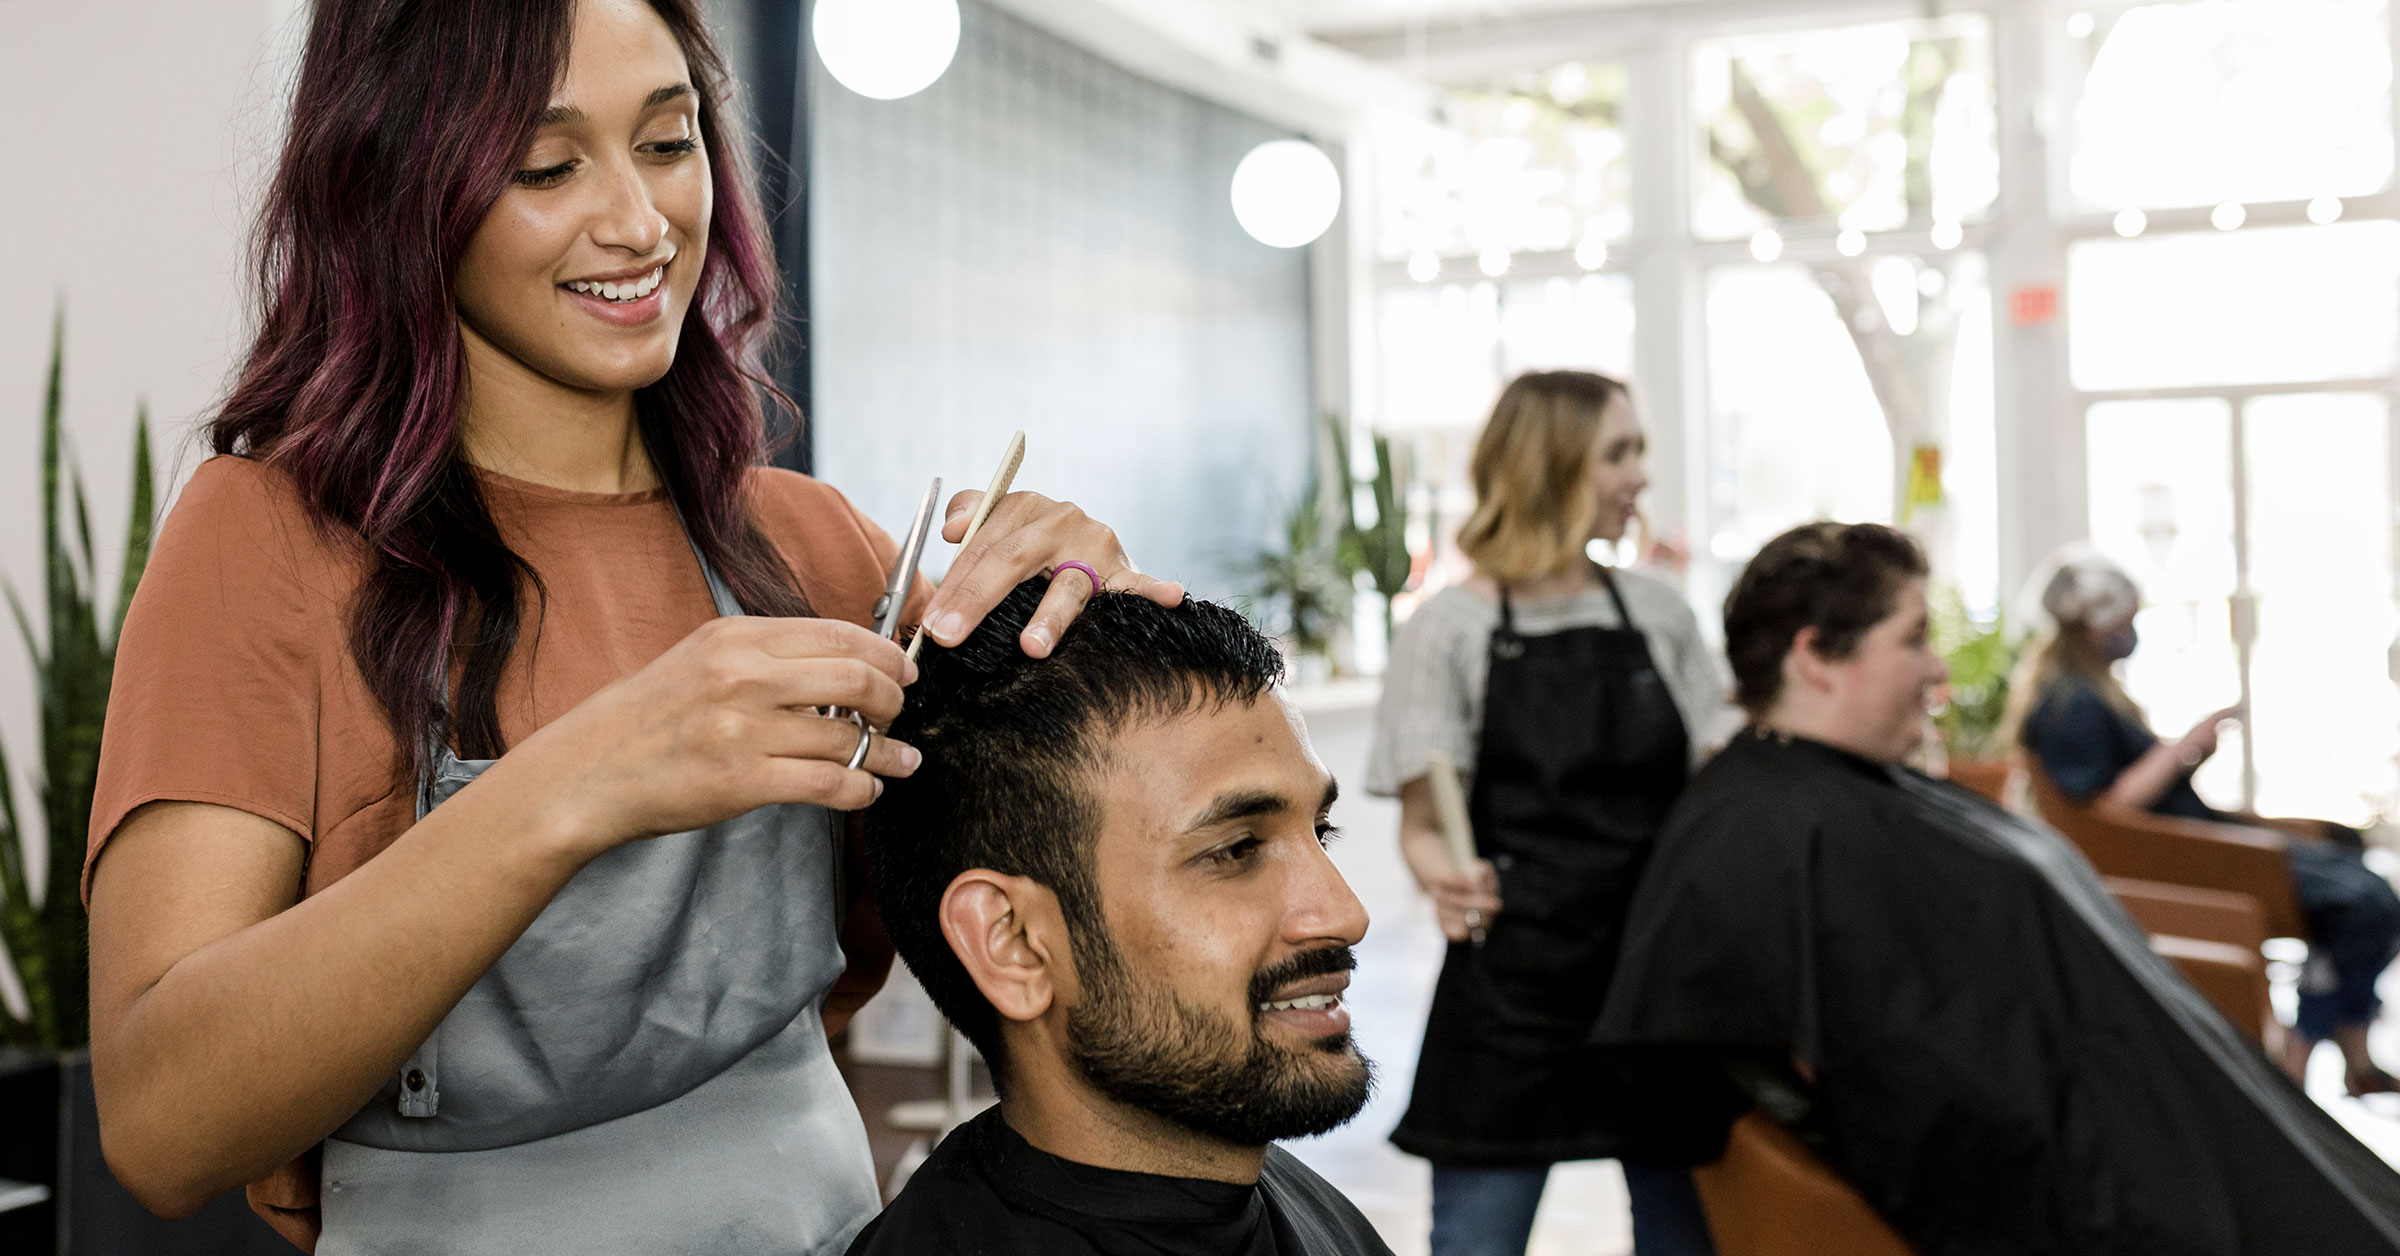 An image of a female barber trimming the hair of her client in a vibrant barber shop